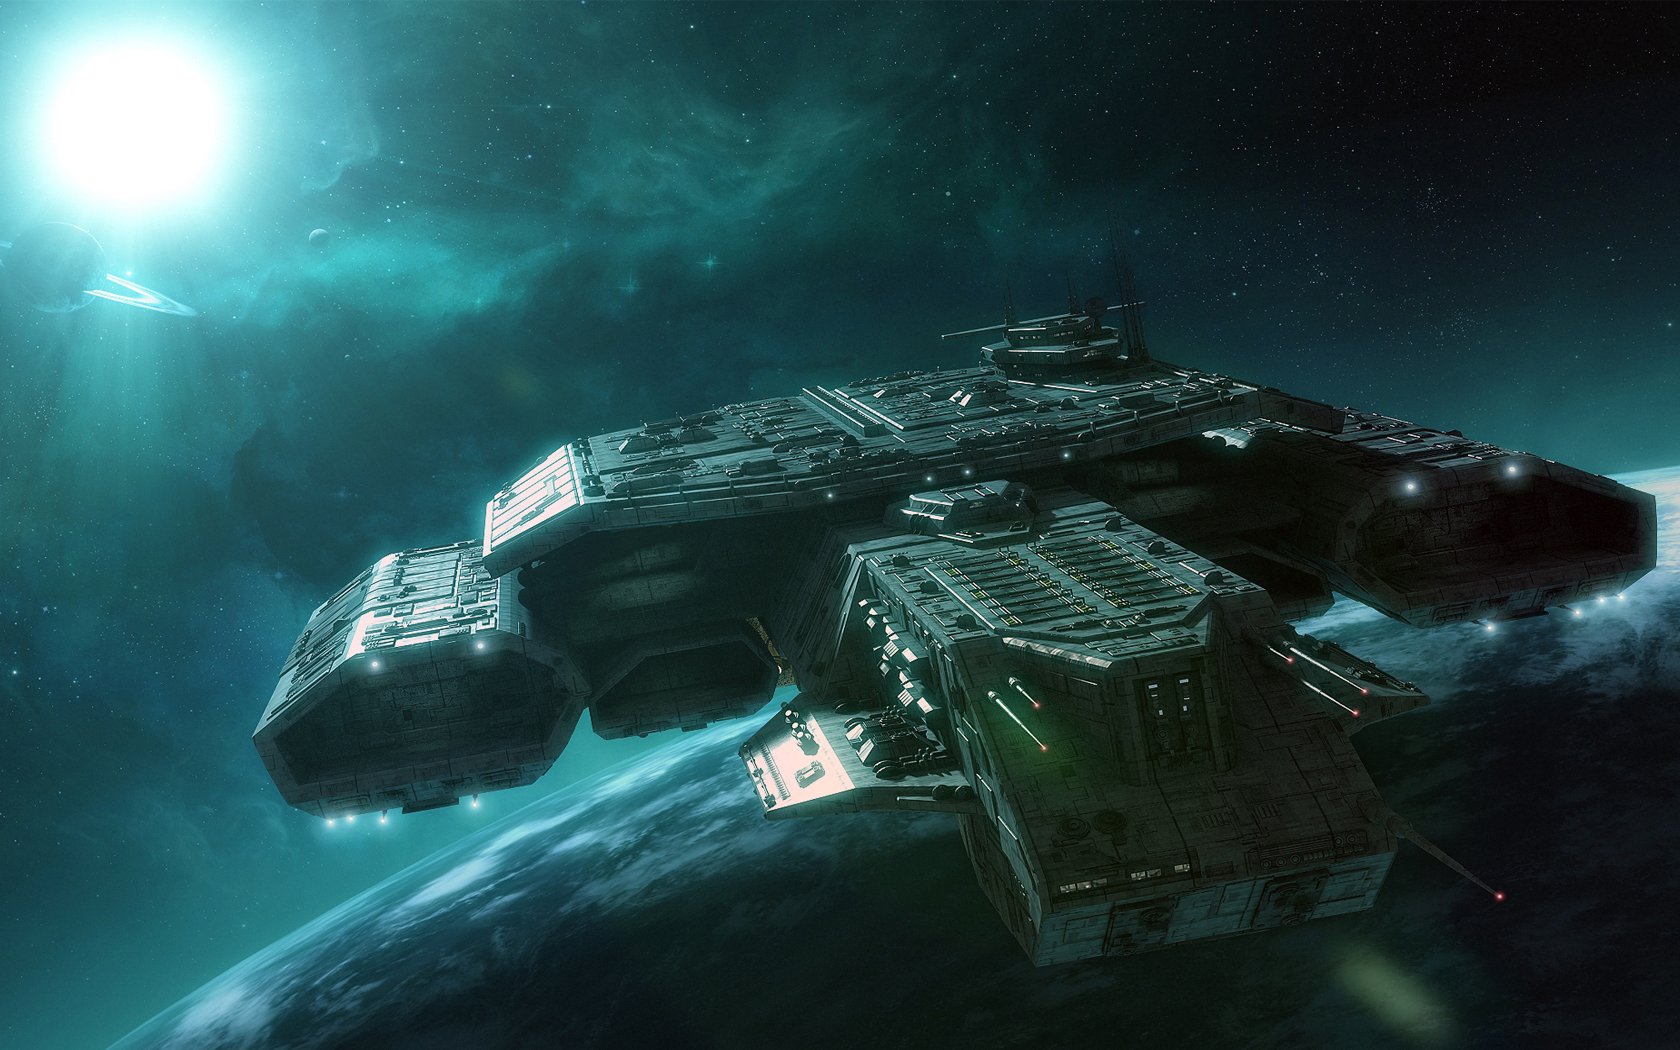  Wallpaper 1680x1050 Stargate Spaceships Science Fiction Vehicles 1680x1050